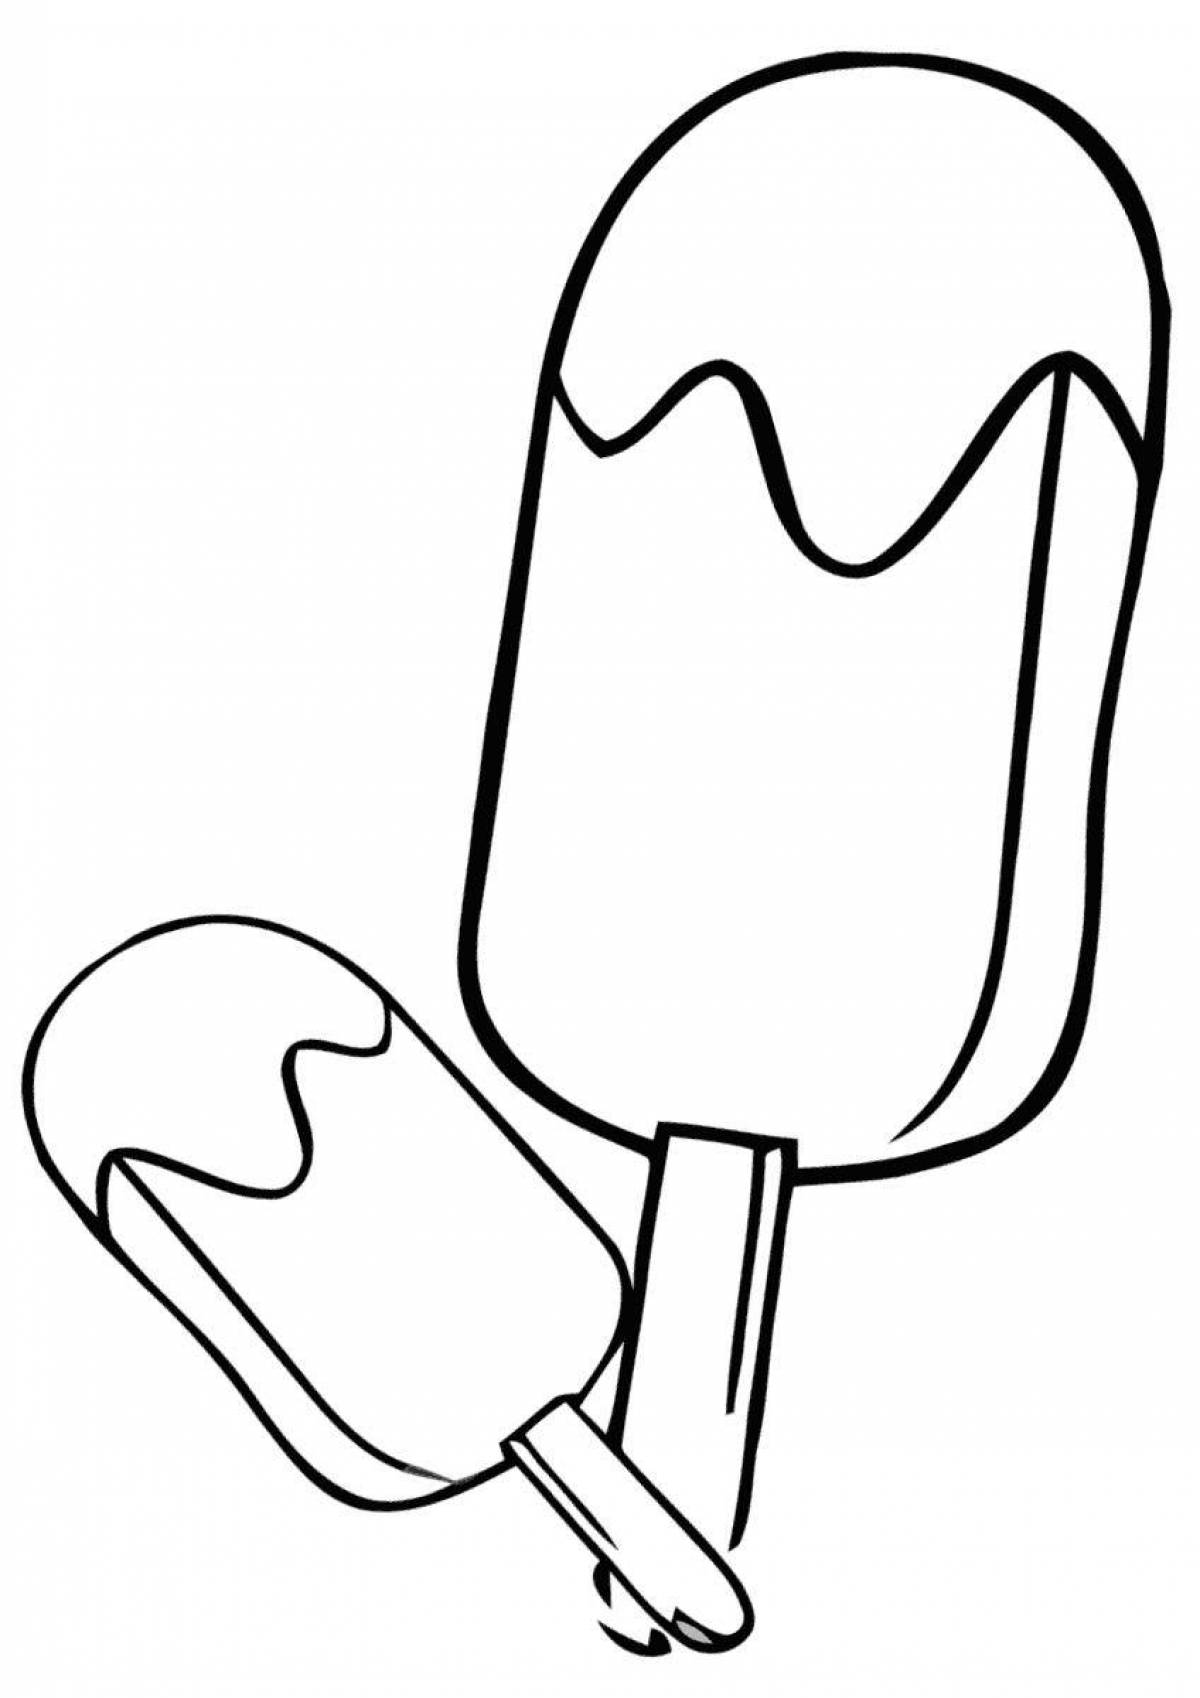 A fun popsicle coloring book for kids